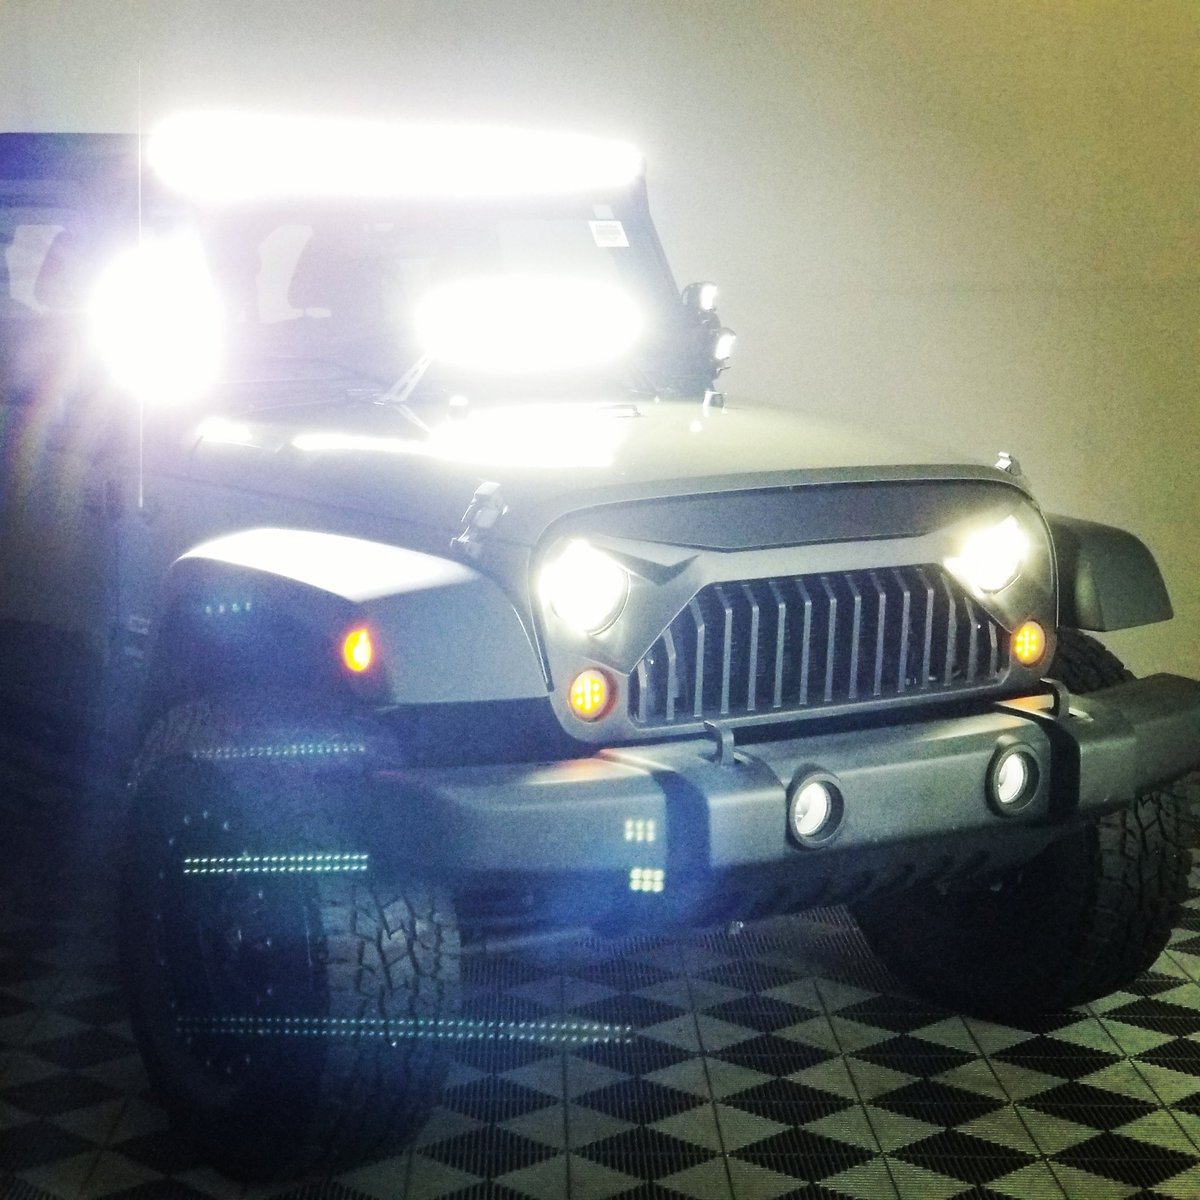 Local Trade!! Pre-Owned #custom 2015 #Jeep #WranglerUnlimited #Sport model available for sale today. Refer Stock # 190290A
.
Visit #KernersvilleCDJR #31Dodge
.
.
#WranglerUnlimited #jeepwrangler #InstaJeep #InstaPhoto #lightbar #InstaAutos #CarsOfInstagram #4x4  #offroad #Mudding